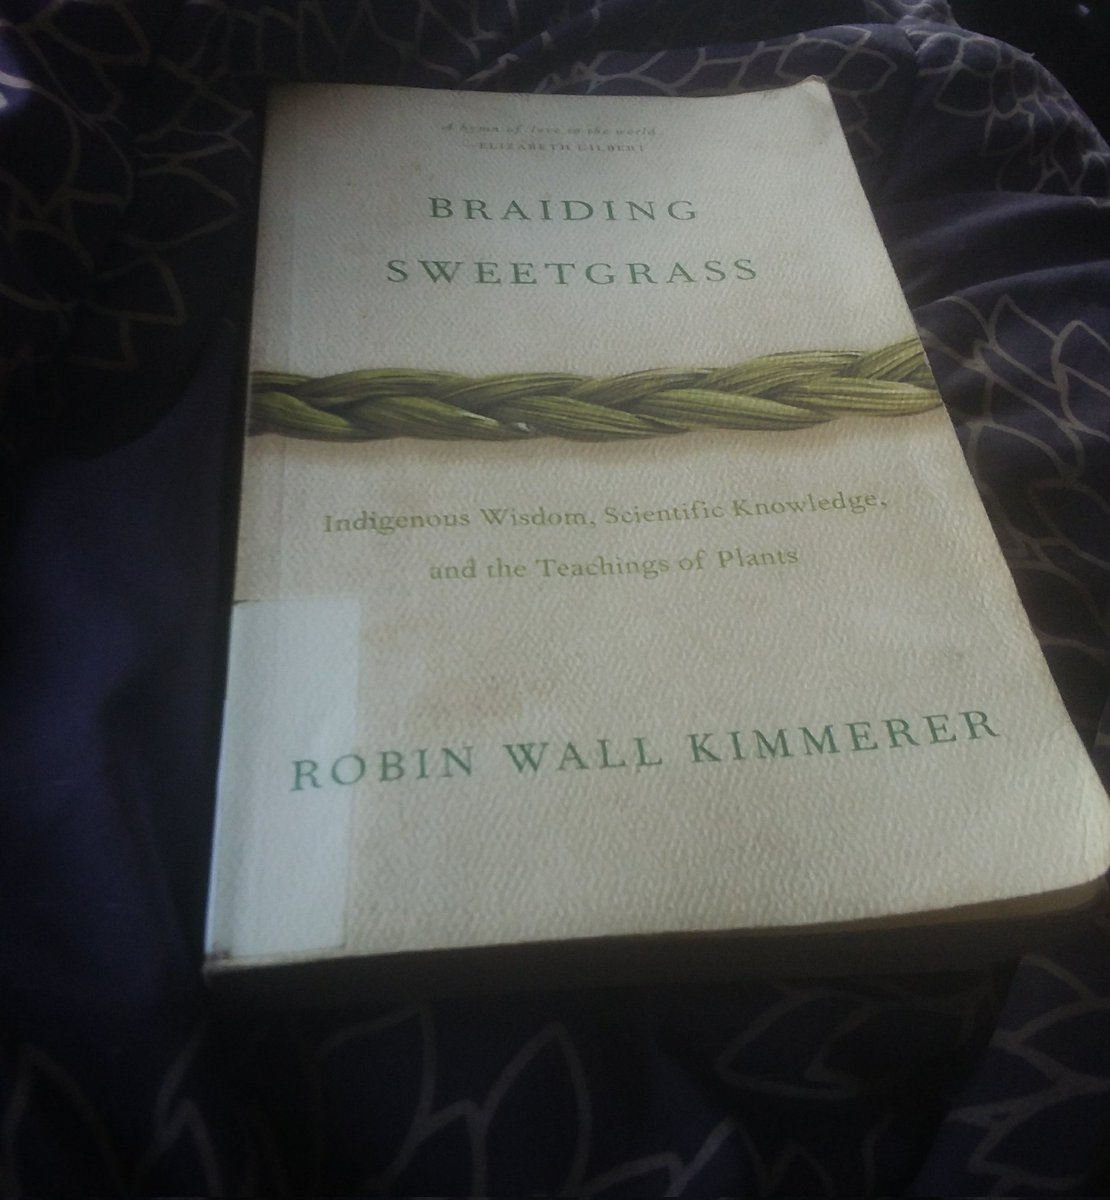 I really loved this book, Robin Wall Kimmerer, weaves her own life stories into, and inspires me to have a deeper relationship with the earth.

#AmReading #BraidingSweetgrass